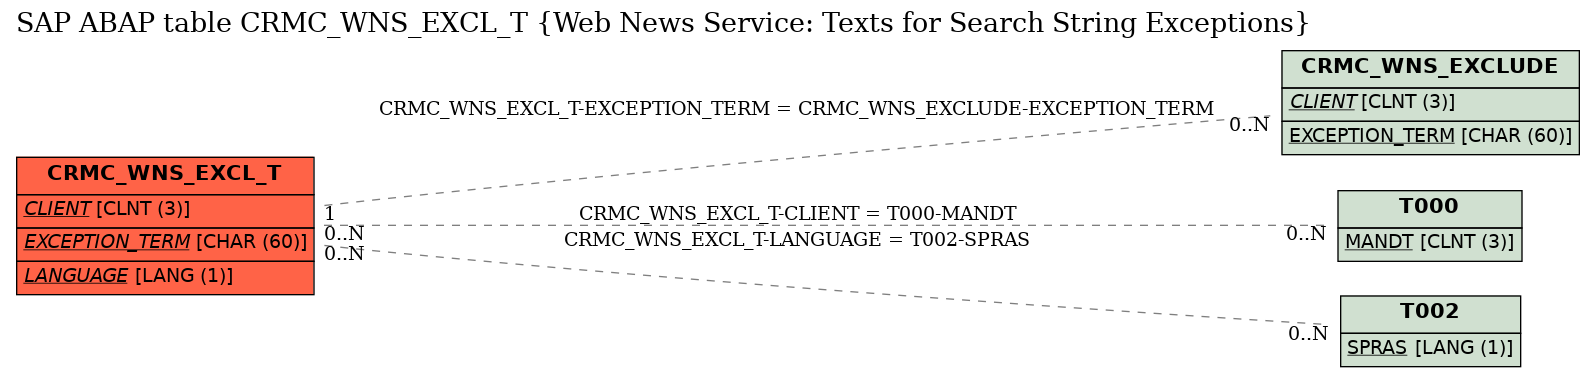 E-R Diagram for table CRMC_WNS_EXCL_T (Web News Service: Texts for Search String Exceptions)